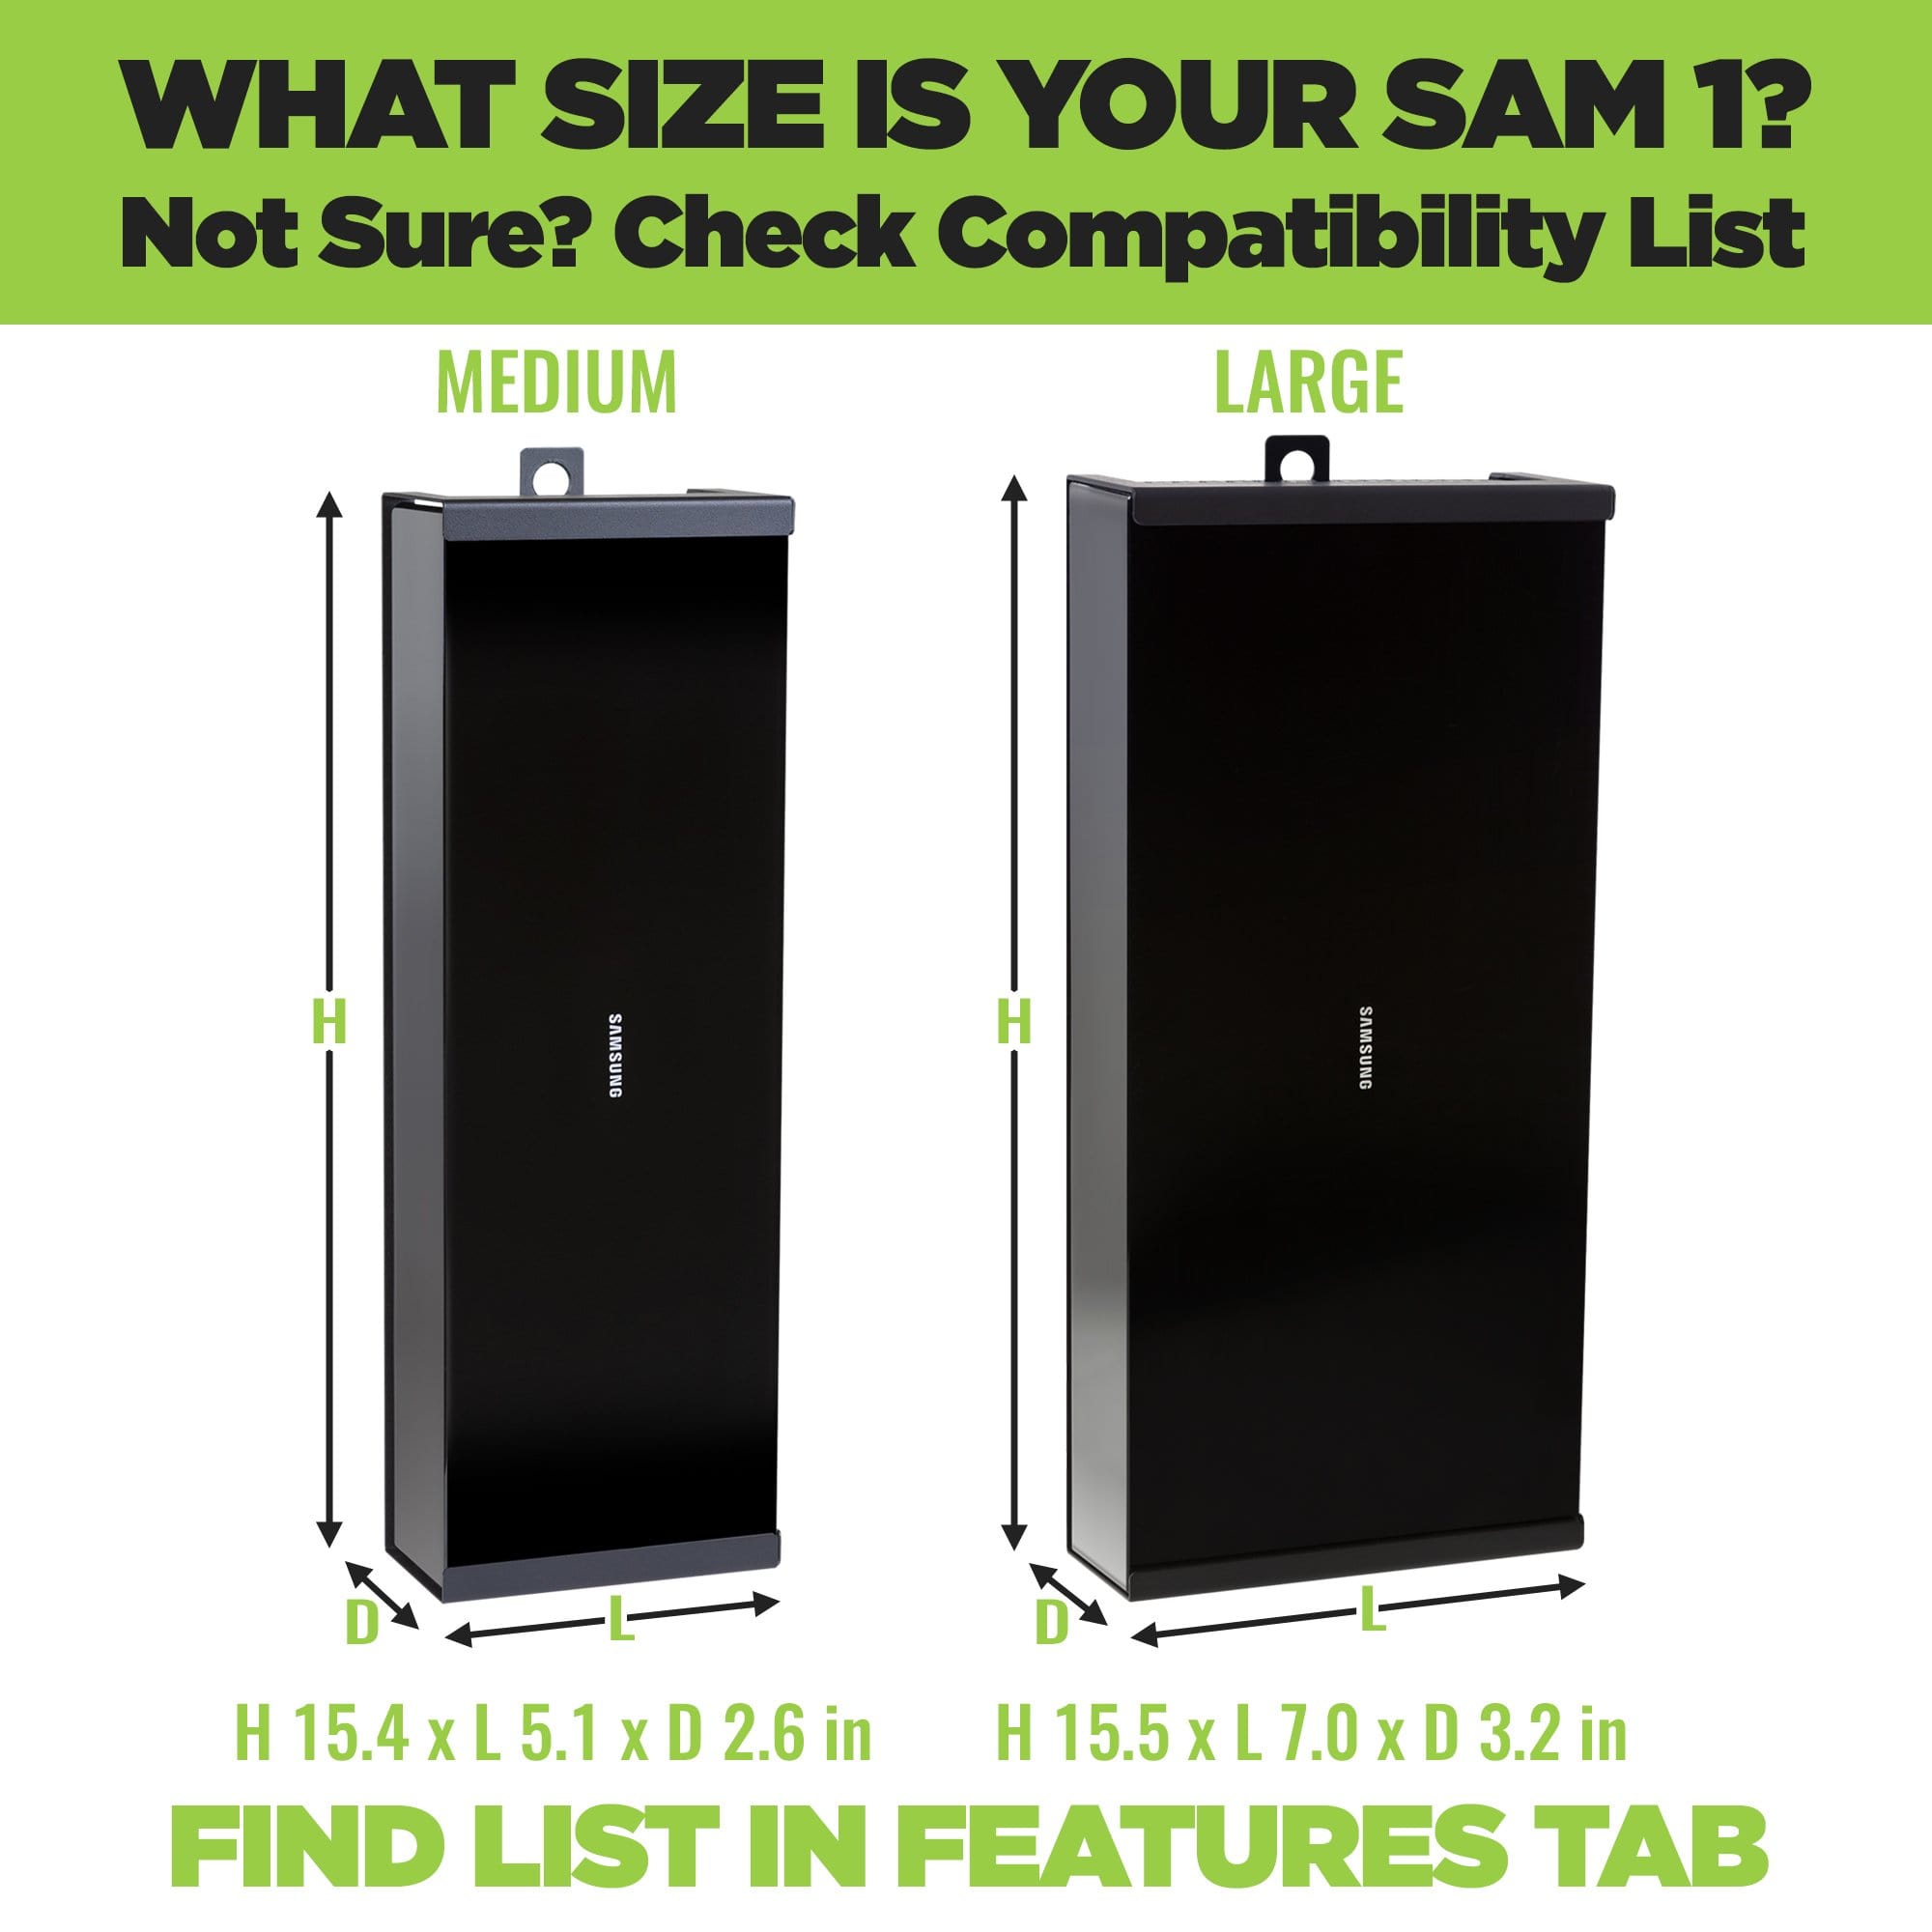 Chart showing the size difference between the Large Samsung One Connect Box and the medium Samsung One Connect